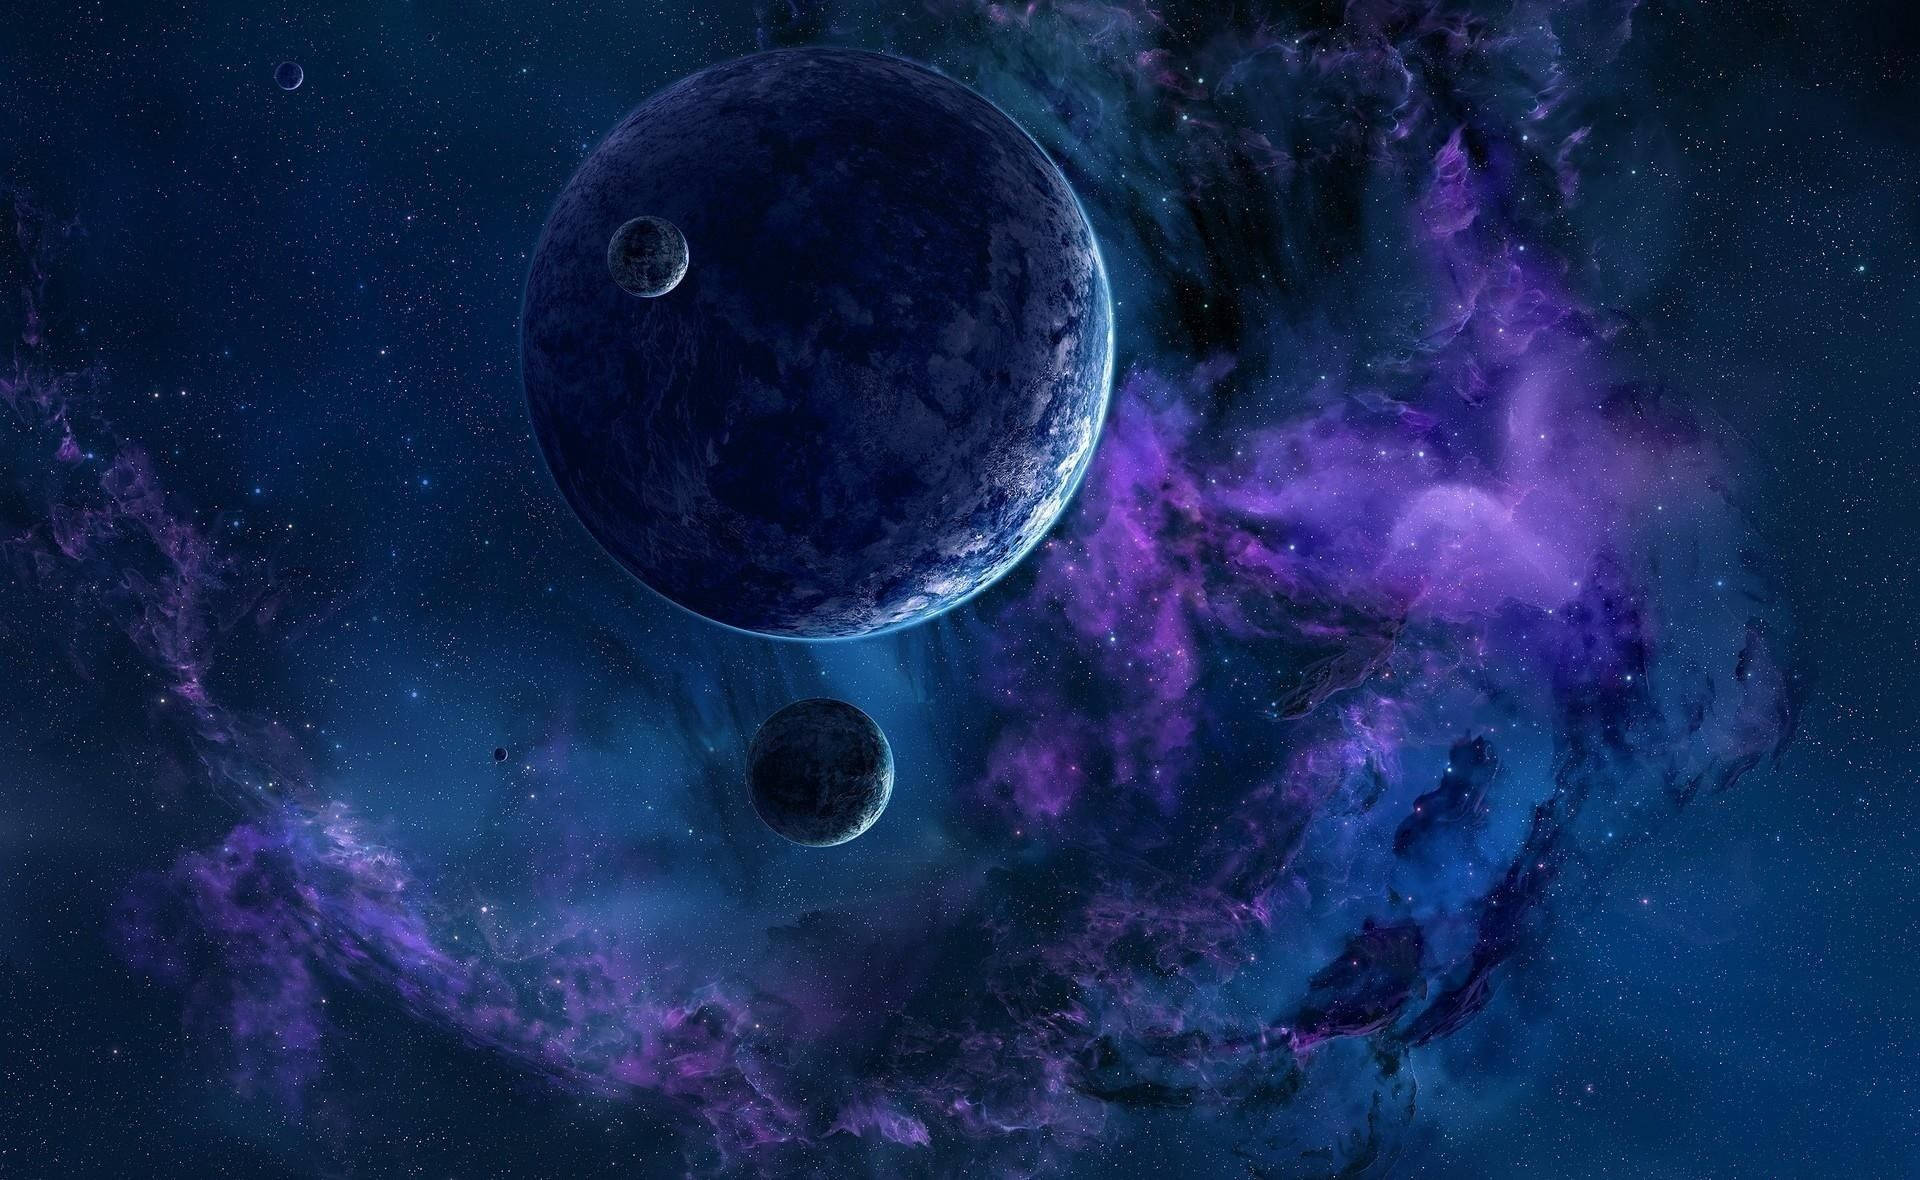 Cool Planets In The Galaxy Tablet Wallpaper